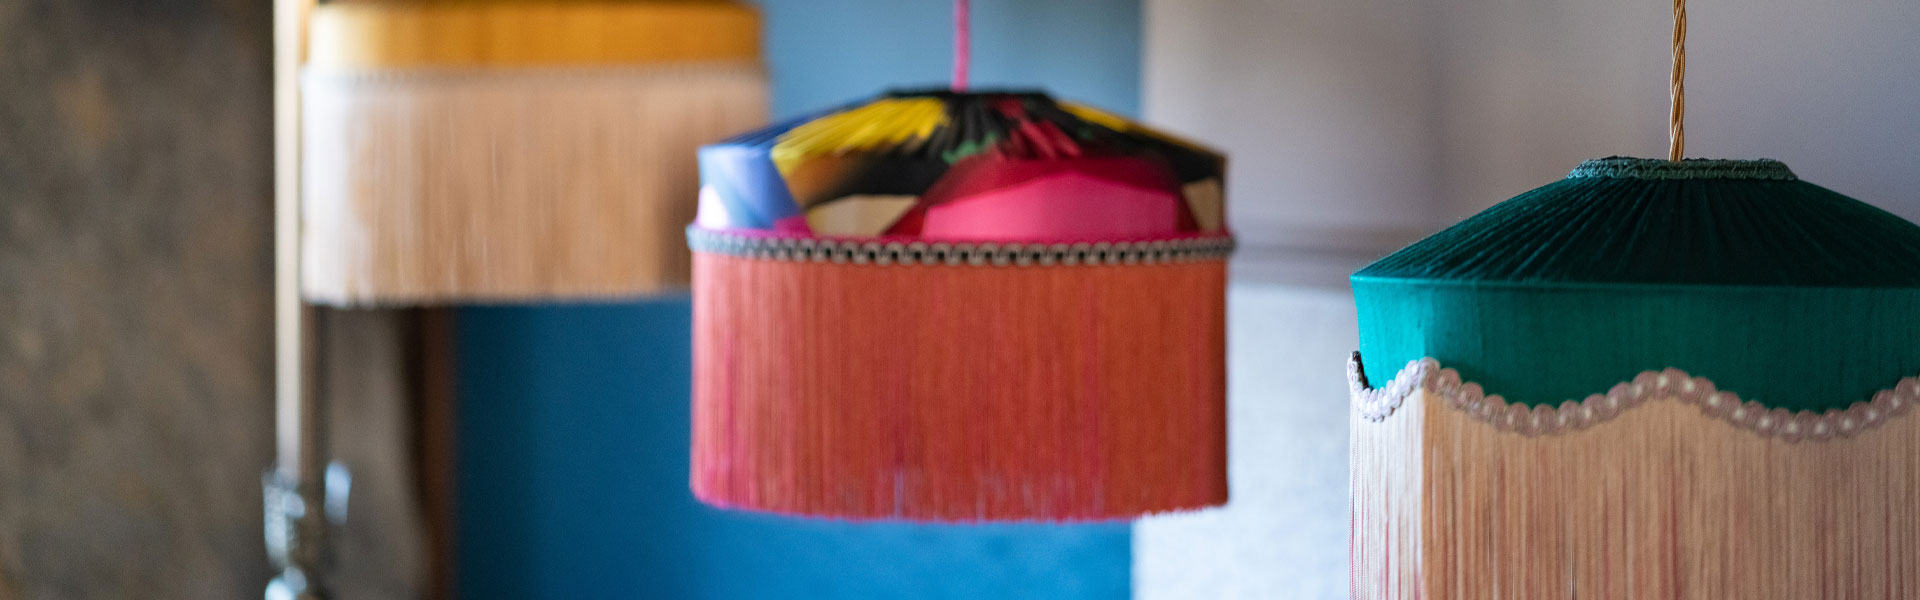 tassel lampshades are a key AW21 trend